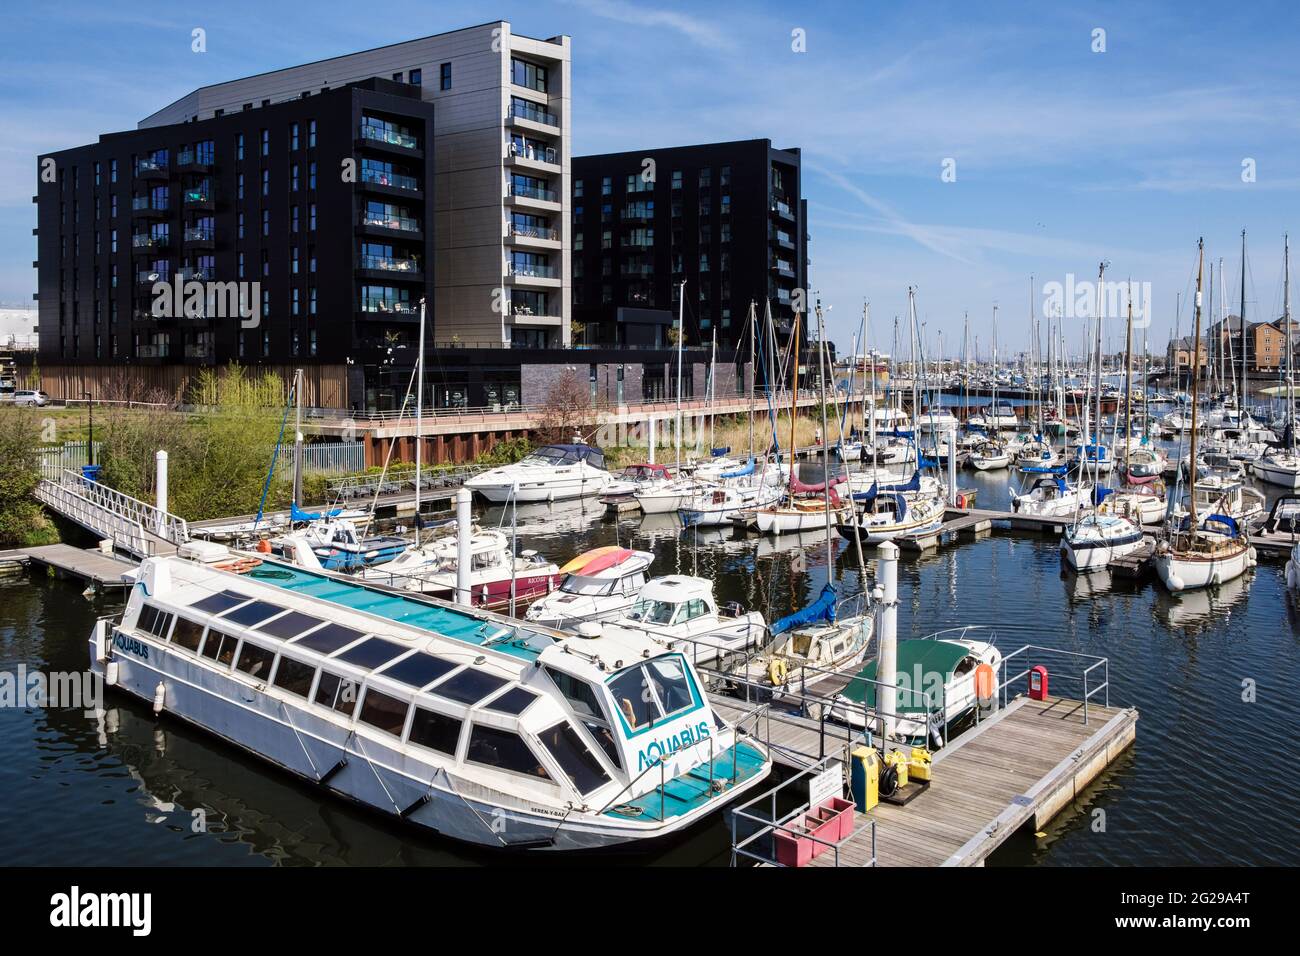 Aquabus and boats moored by jetties on Ely River marina. Penarth, Cardiff, (Caerdydd), Vale of Glamorgan, South Wales, UK, Britain Stock Photo